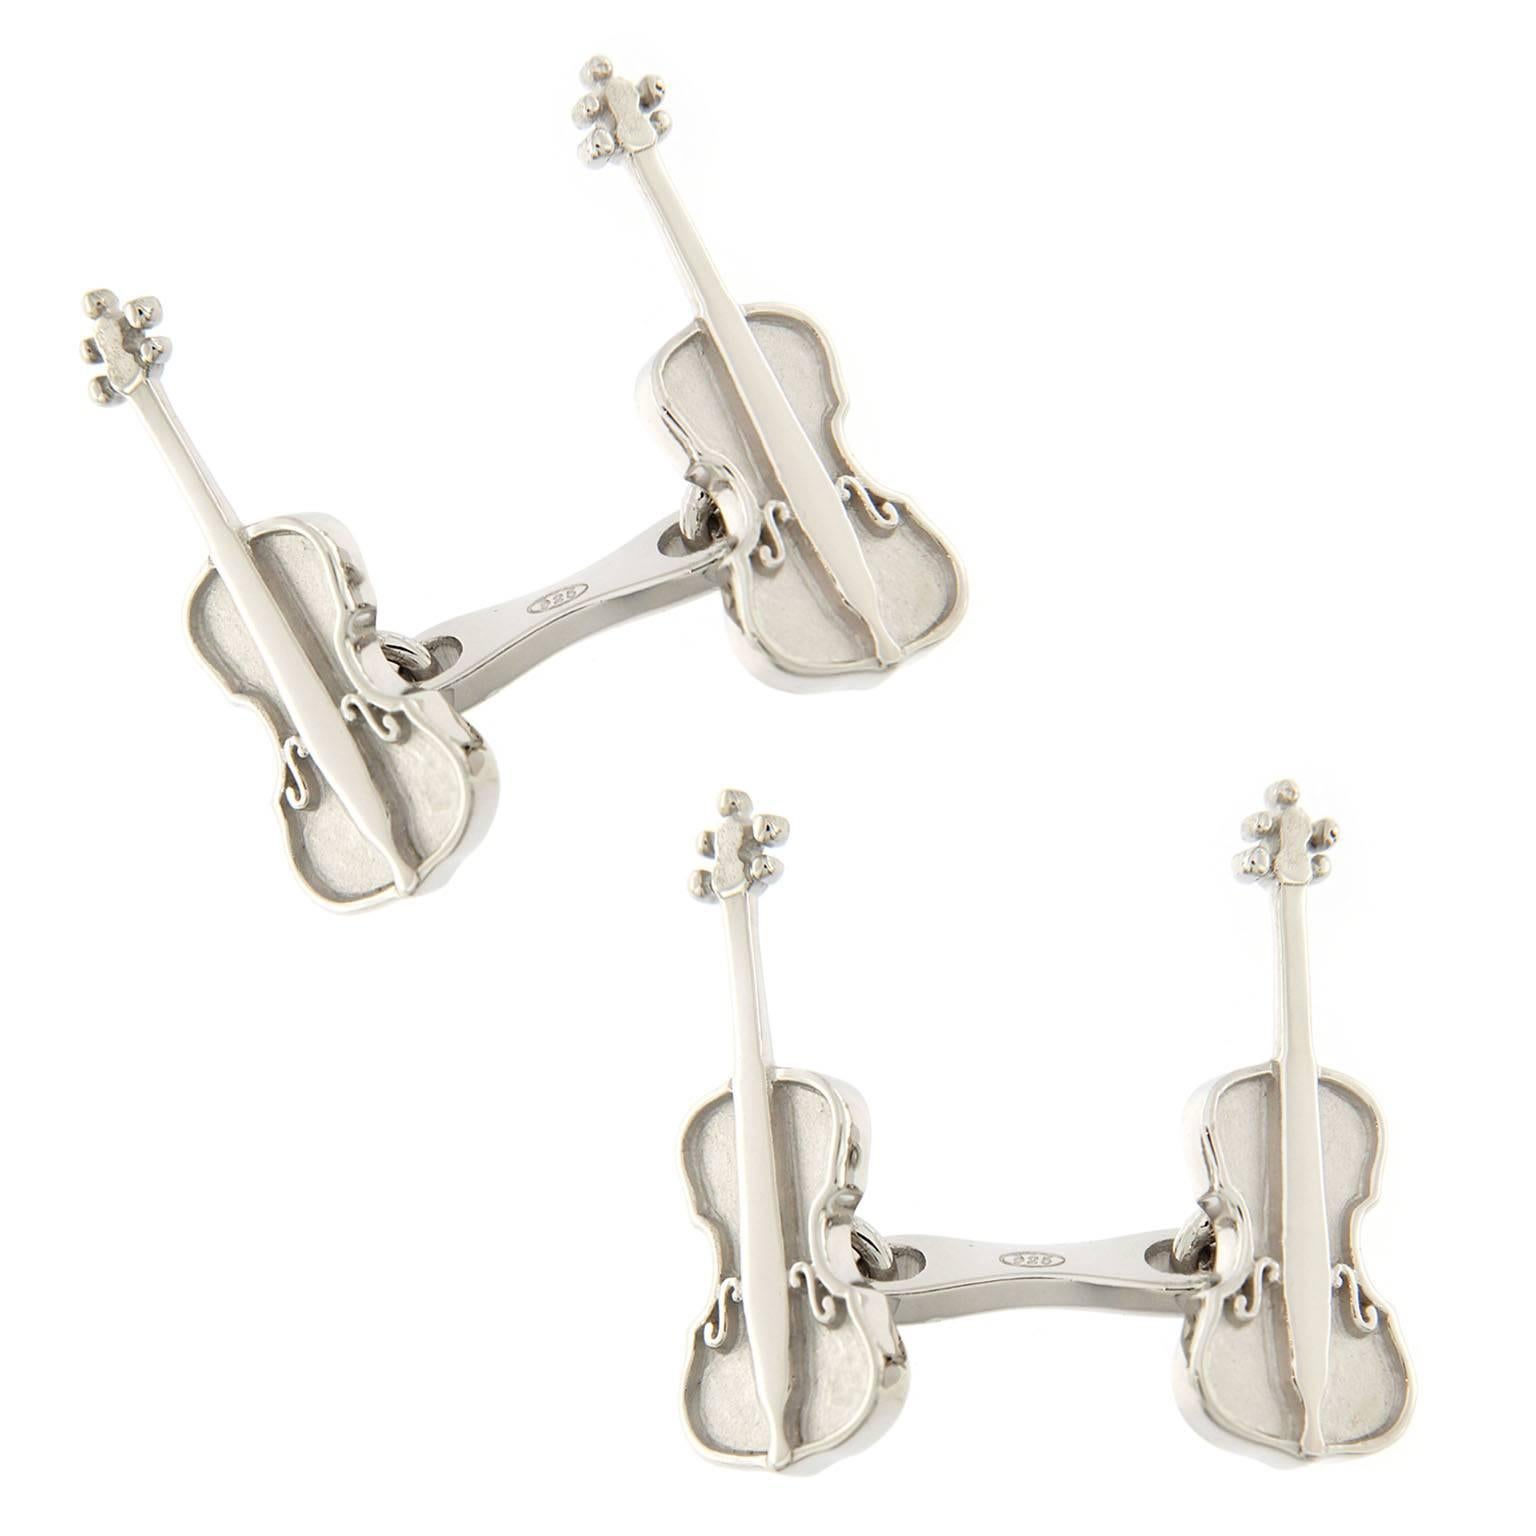 Jona design collection, hand crafted in Italy, violoncello Sterling Silver cufflinks.

All Jona jewelry is new and has never been previously owned or worn. Each item will arrive at your door beautifully gift wrapped in Jona boxes, put inside an